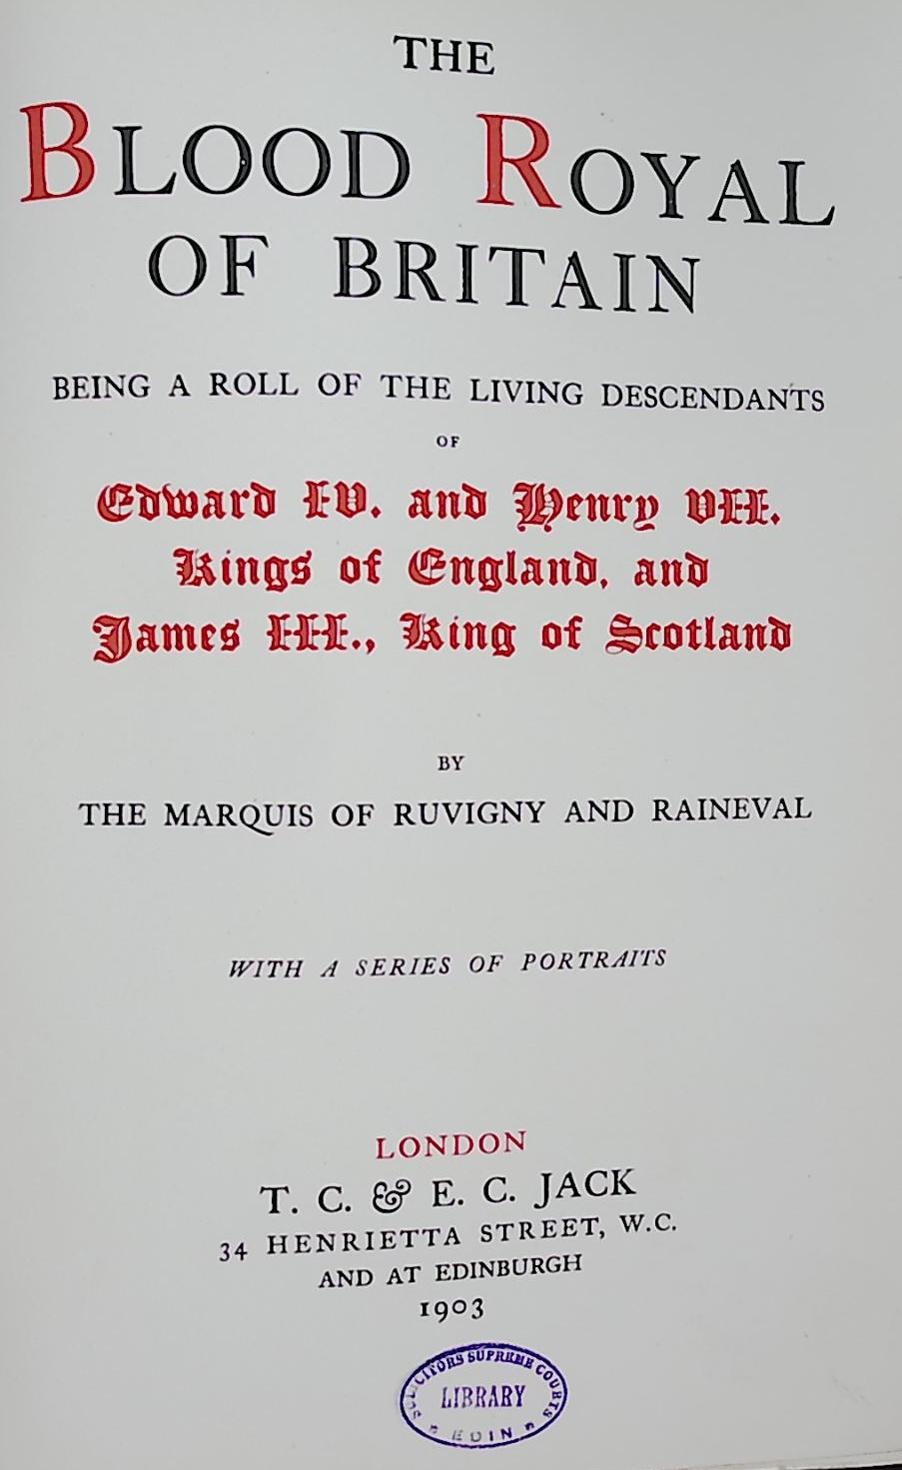 The Blood Royal of Britain Being A Roll of the Living Descendants of Edward IV and Henry VII, Kings of England and James III, King of Scotland